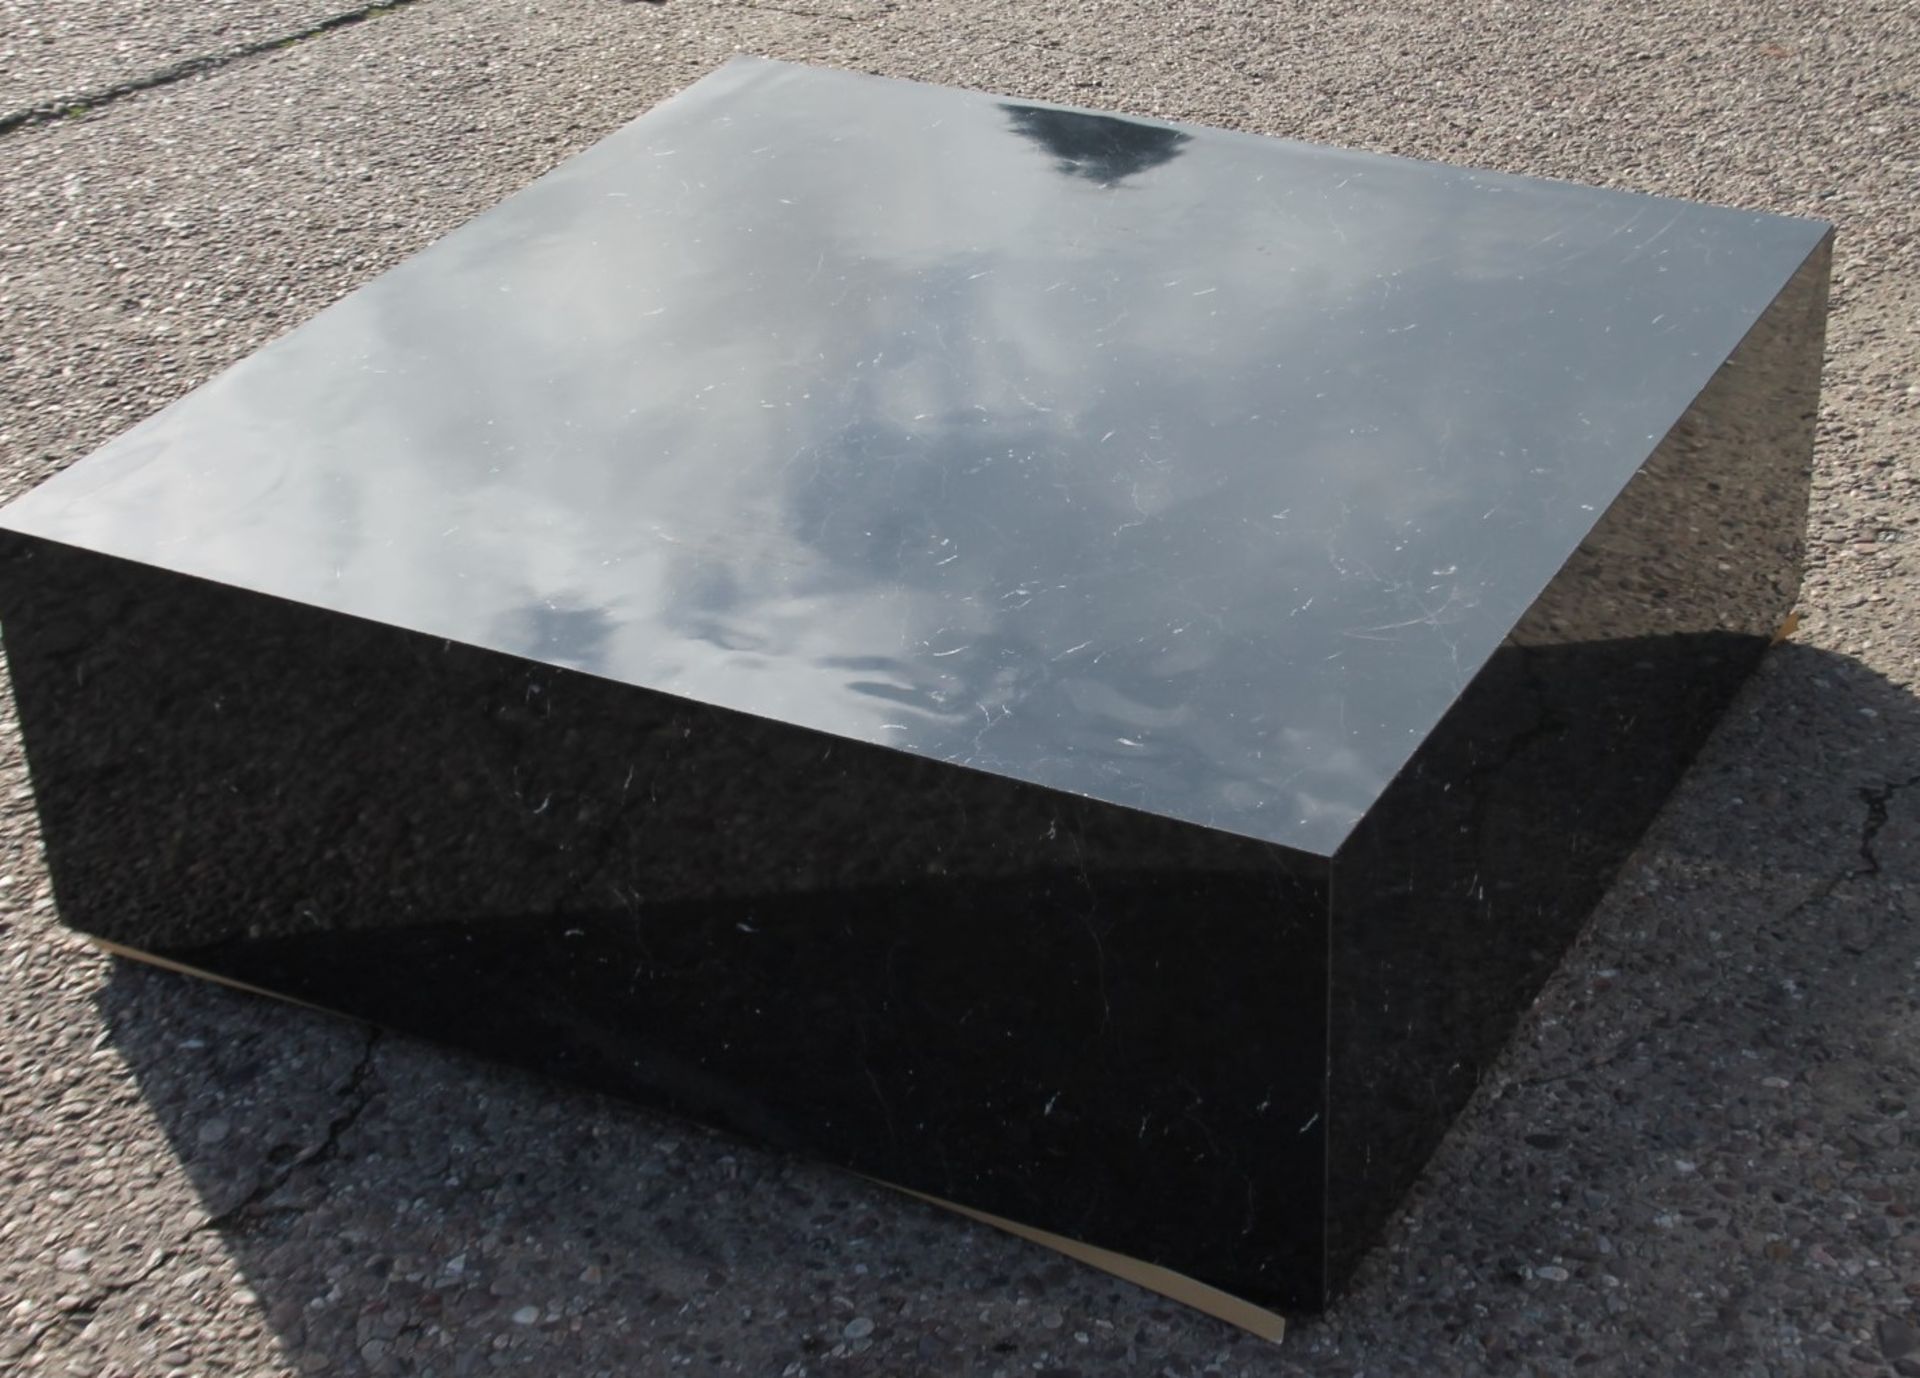 4 x Assorted 1-Metre Wide Wooden Retail Plinth Platforms, All With A Marble-effect Aesthetic - Image 10 of 10